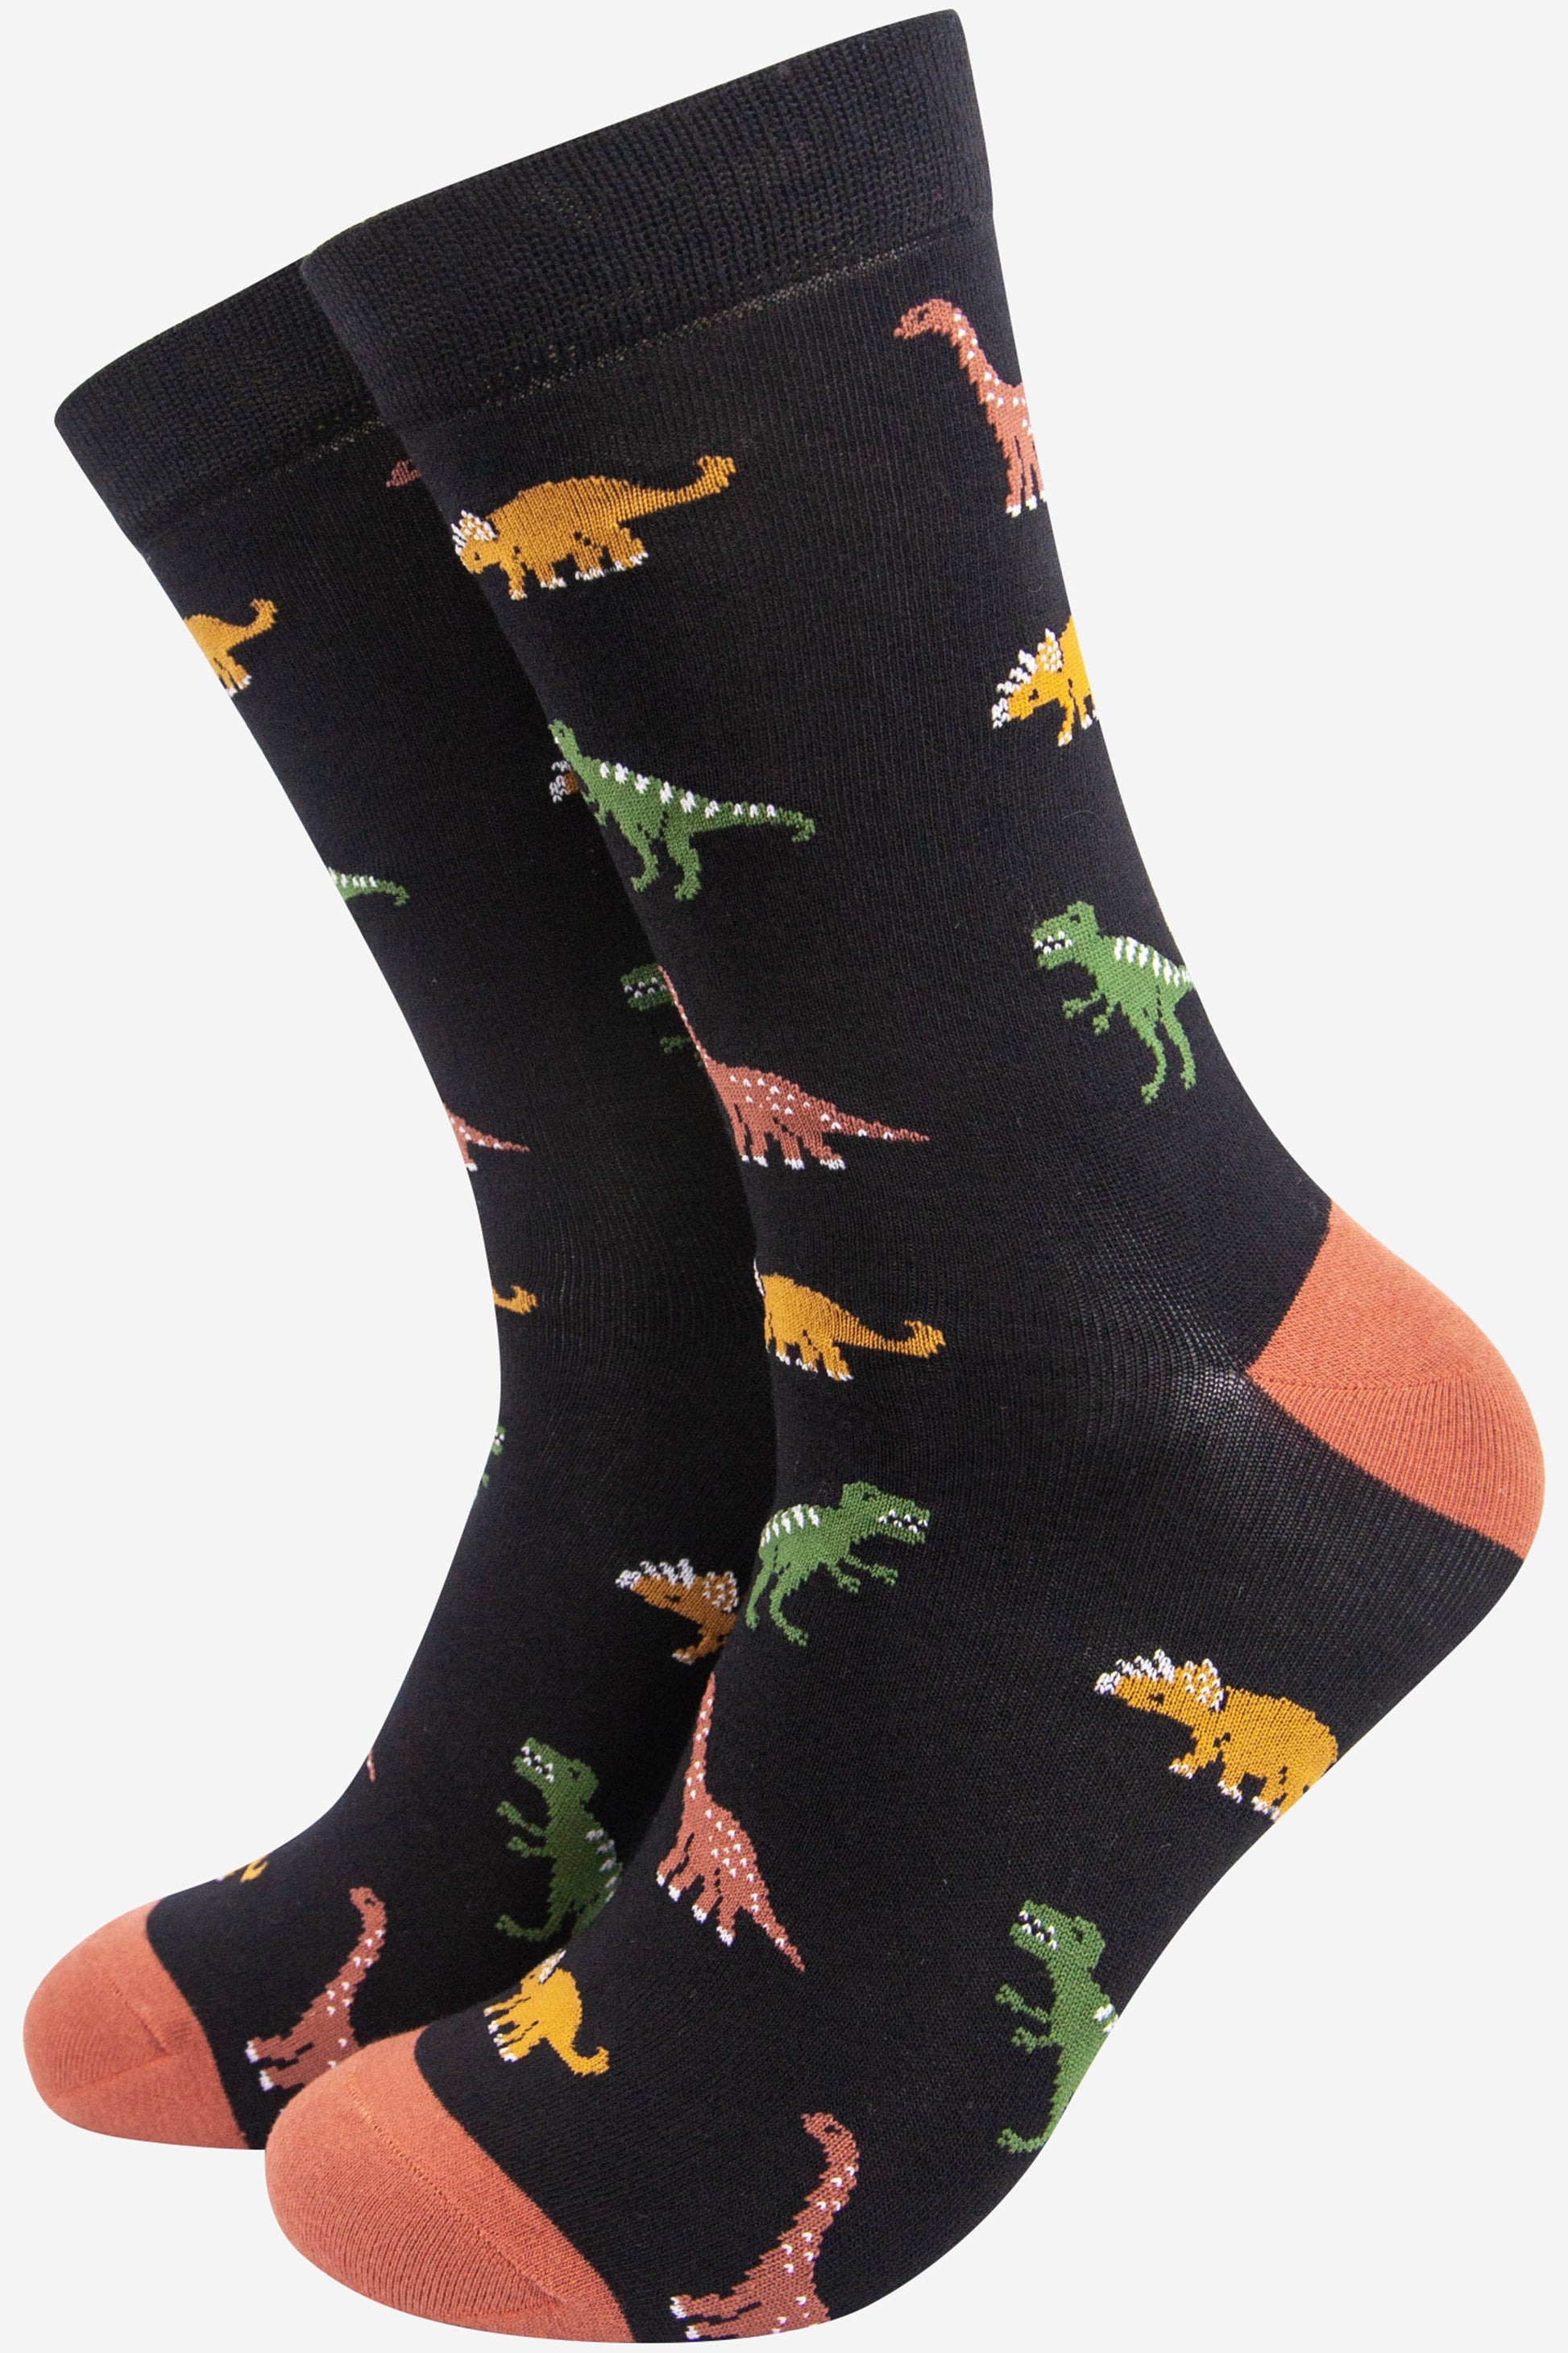 black bamboo socks with an all over patten of assorted dinosaurs in multiple colours, green, orange and yellow